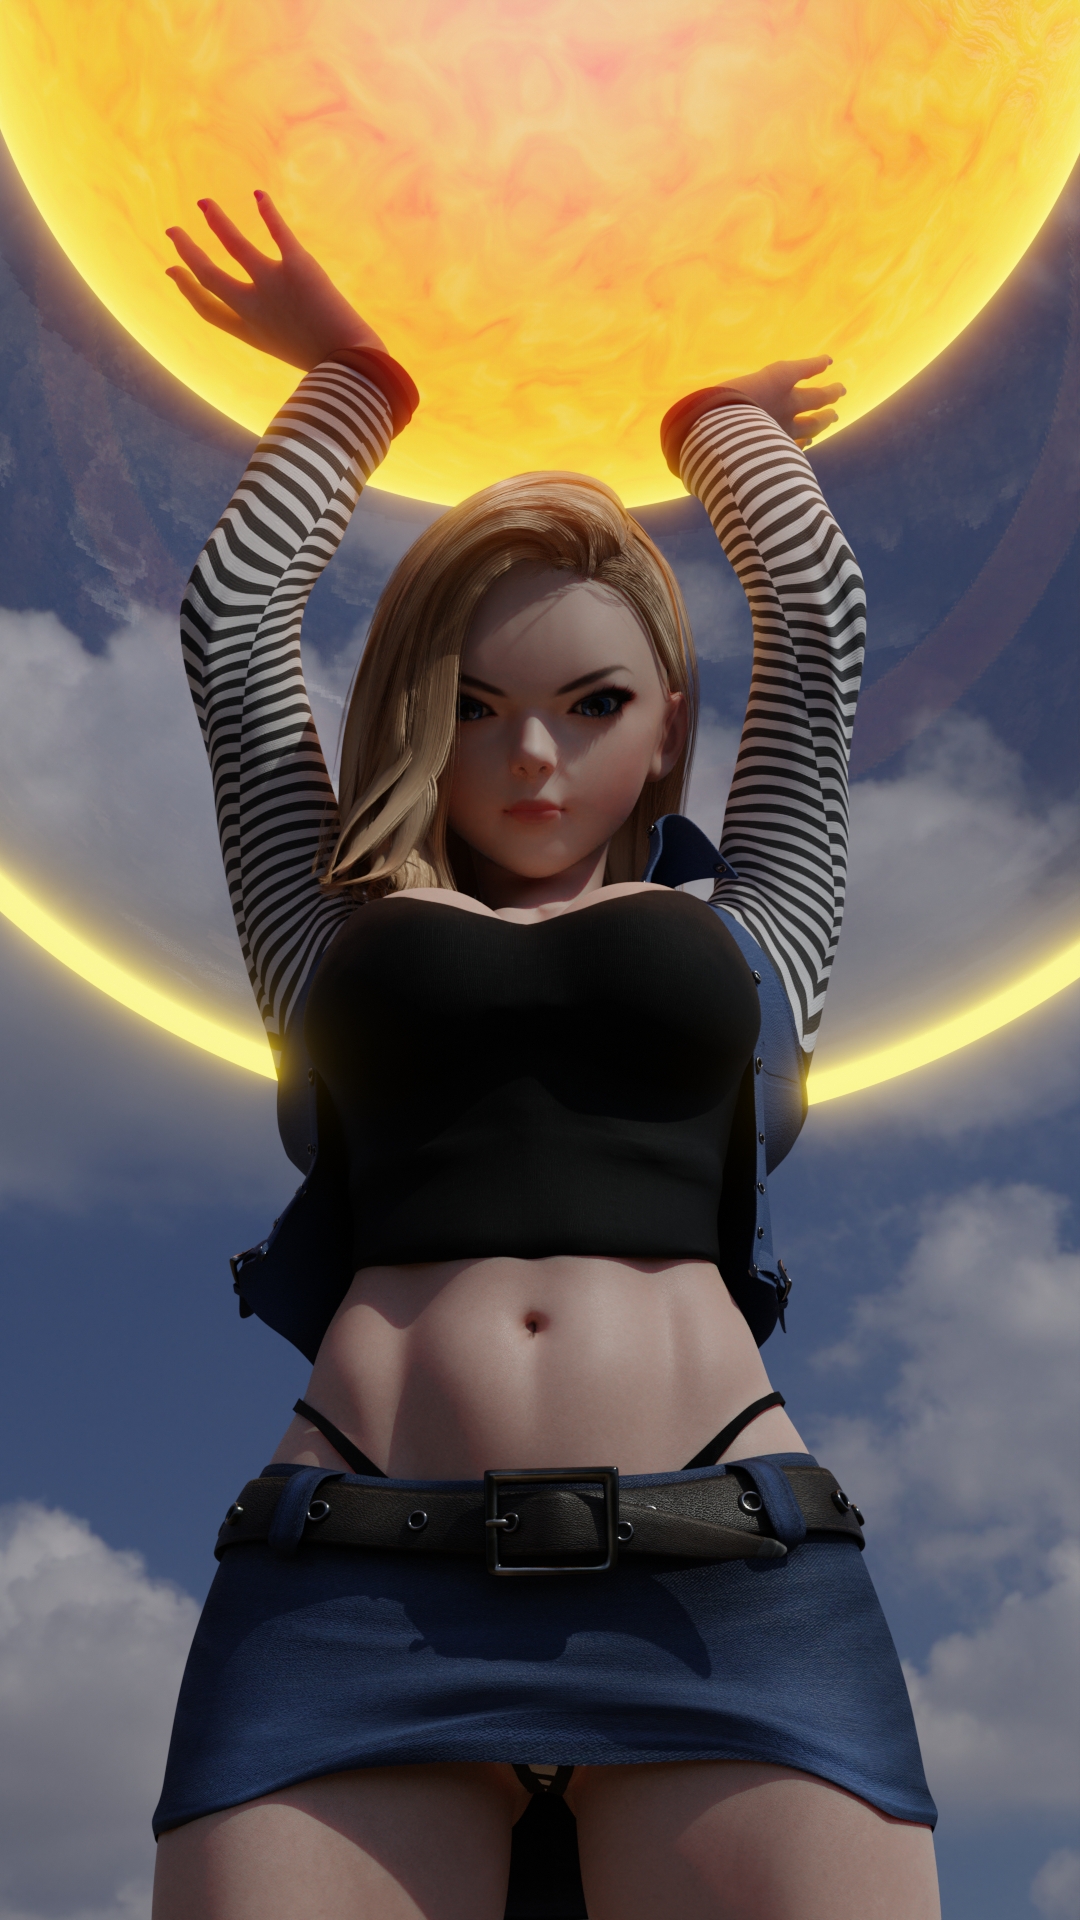 Android 18 Pinup Android 18 Dragonball Pinup Anime